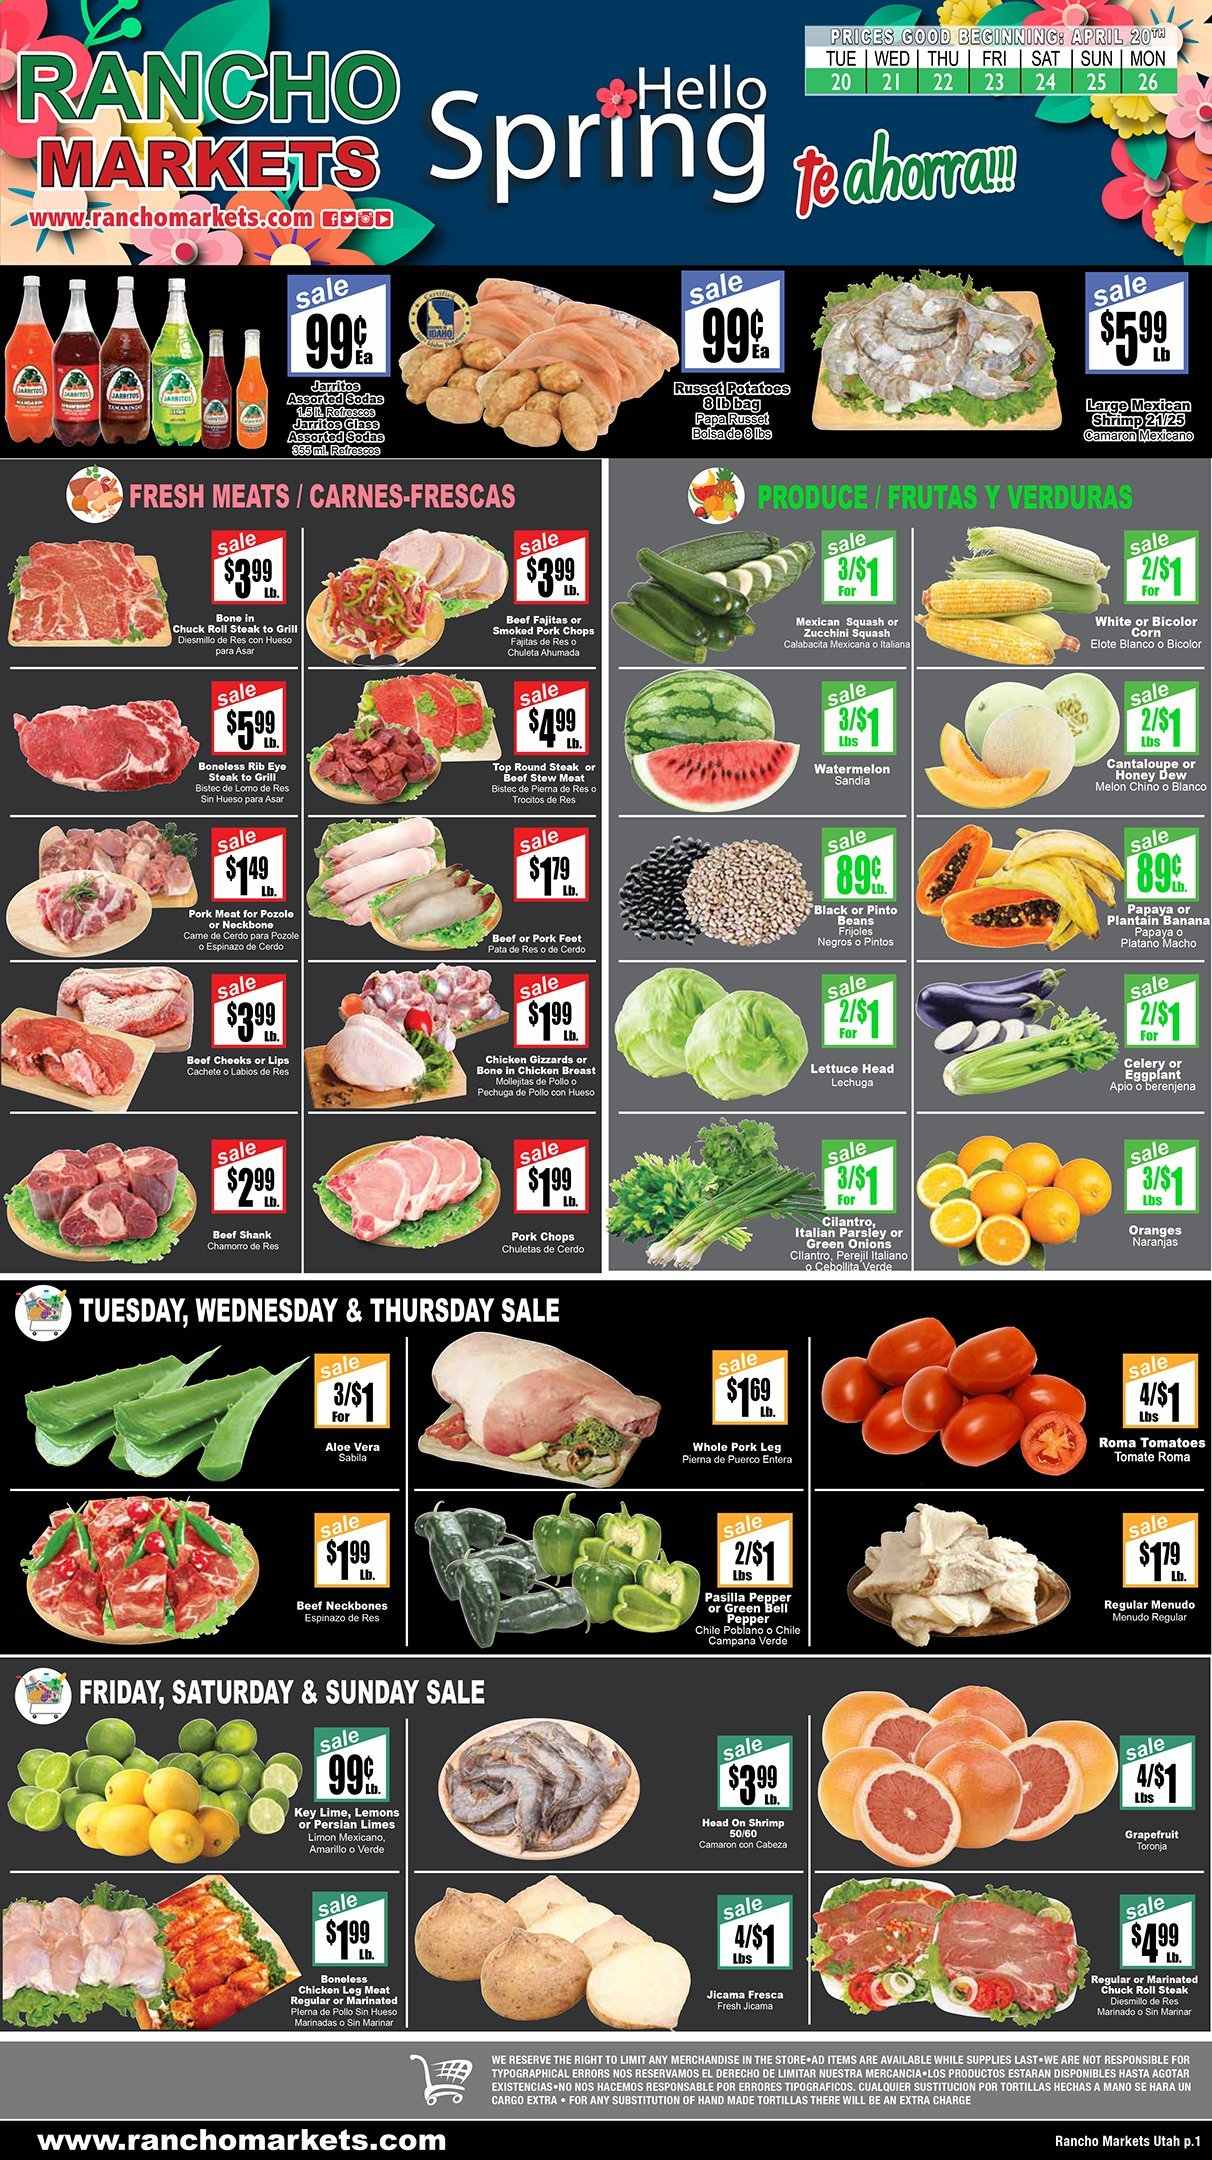 thumbnail - Rancho Markets Flyer - 04/20/2021 - 04/26/2021 - Sales products - stew meat, jicama, tortillas, beans, bell peppers, cantaloupe, corn, russet potatoes, tomatoes, zucchini, potatoes, parsley, lettuce, eggplant, green onion, mexican squash, grapefruits, limes, watermelon, oranges, shrimps, fajita, Mexicano, pinto beans, cilantro, chicken breasts, chicken legs, chicken gizzards, beef meat, beef shank, steak, round steak, chuck steak, ribeye steak, pork chops, pork meat, pork leg, melons, lemons, pasilla. Page 1.